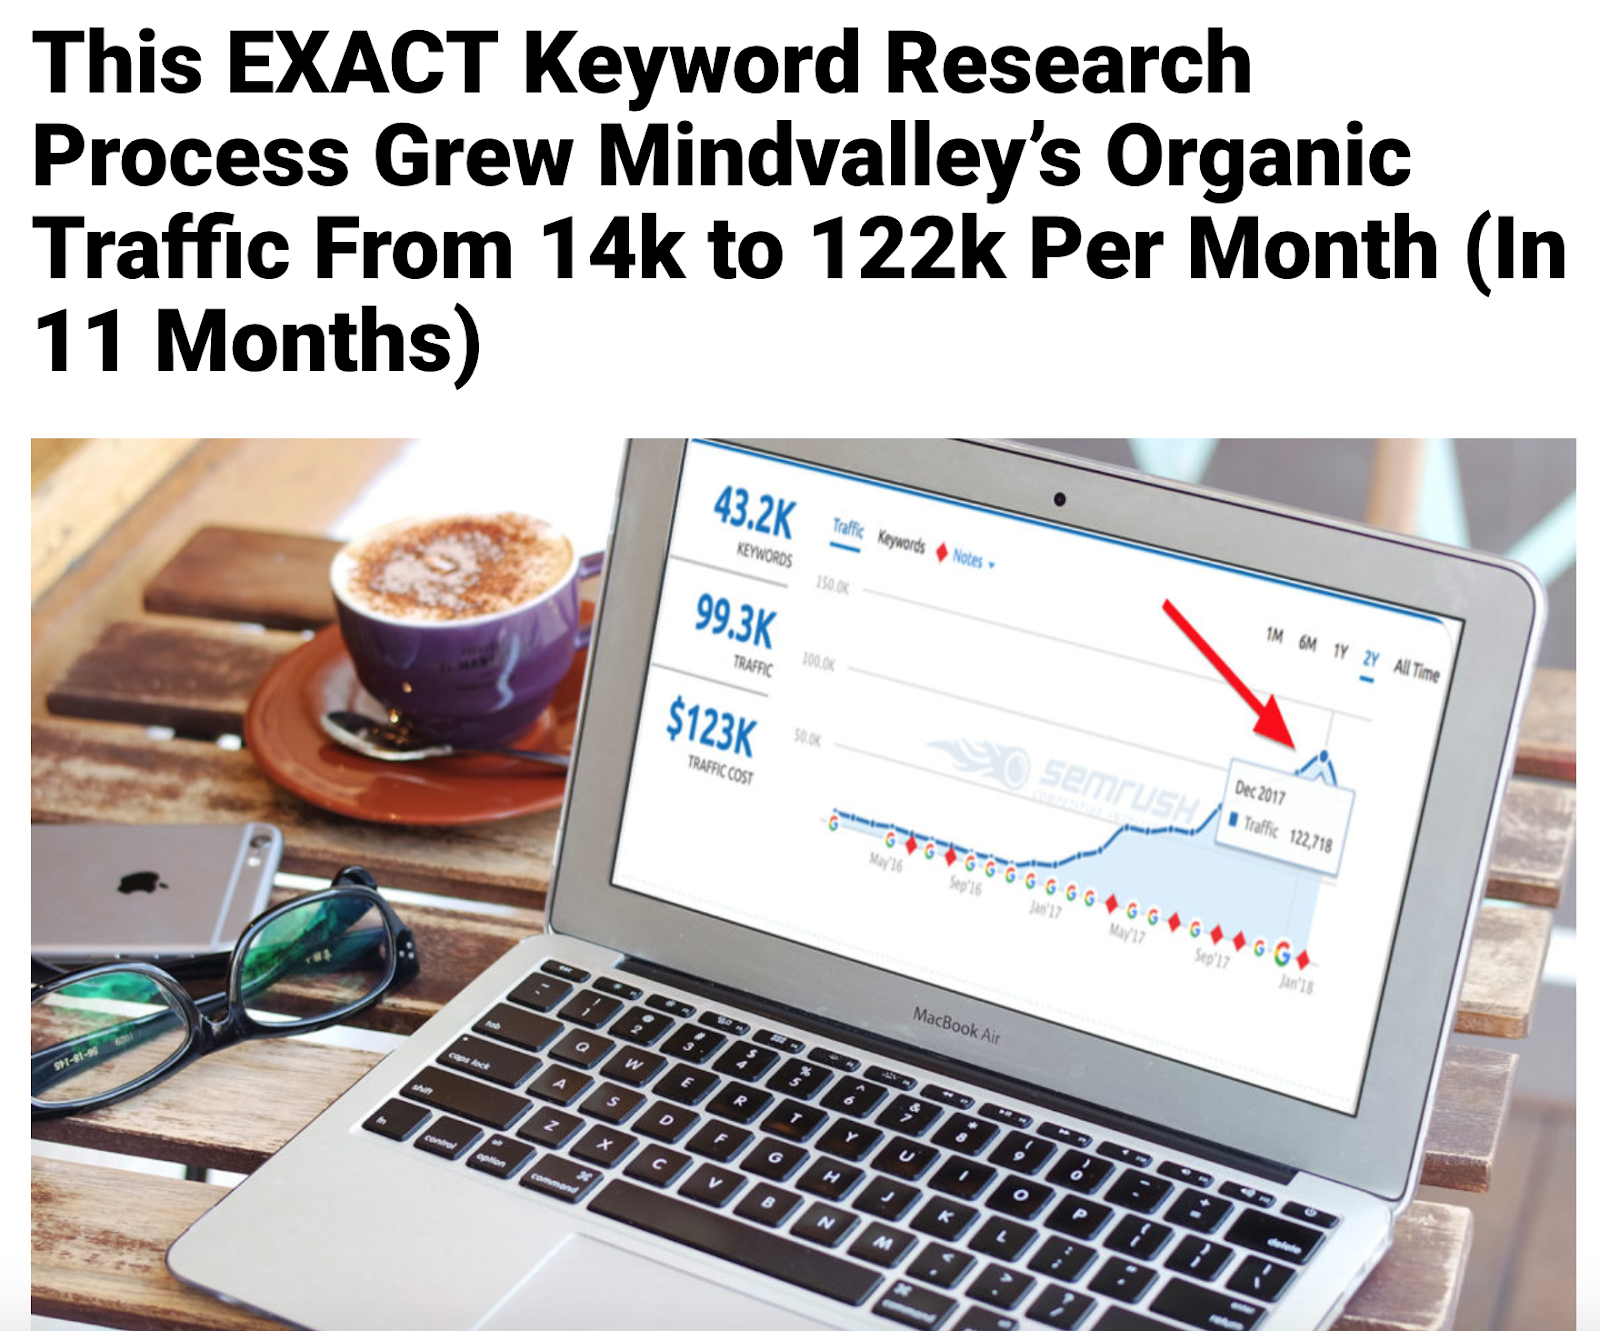 This EXACT Keyword Research Process Grew Mindvalley's Organic Traffic from 14k to 122k per month